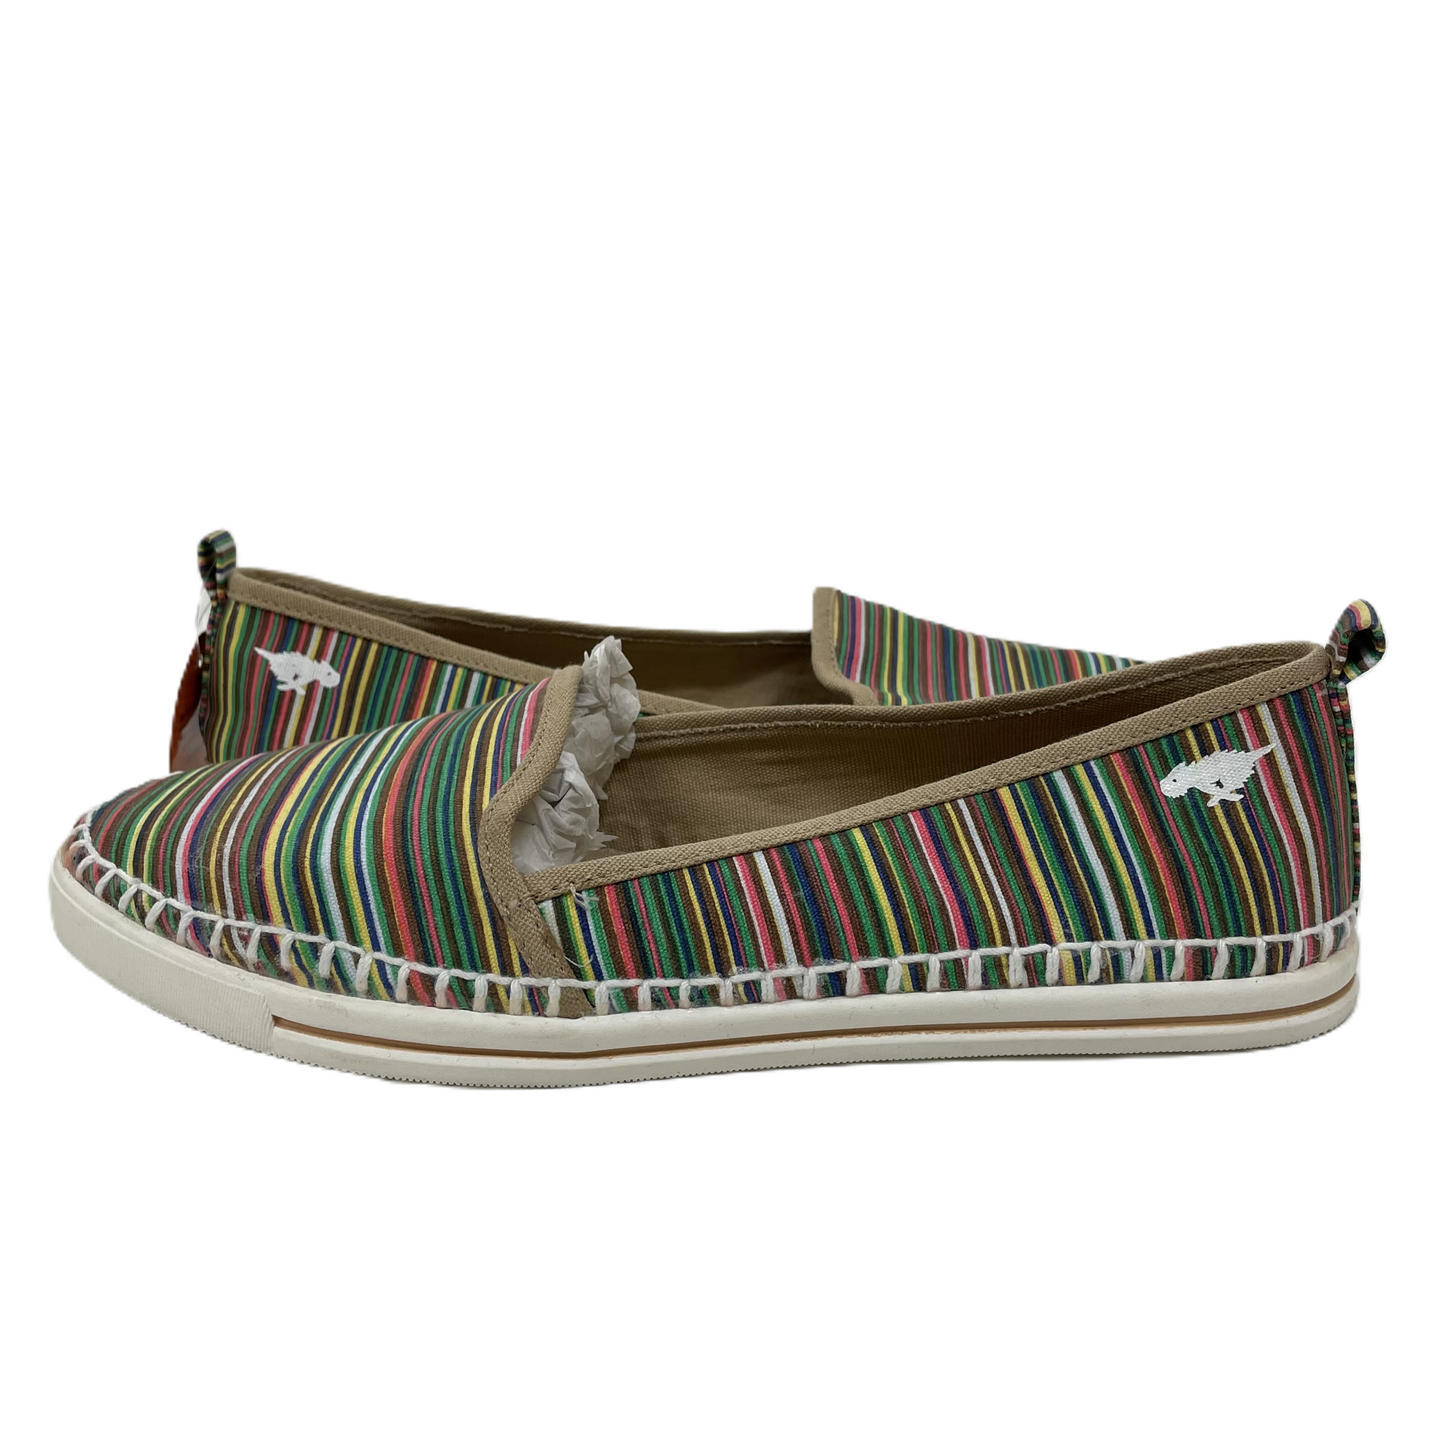 Multi-colored Shoes Sneakers By Rocket Dogs, Size: 8